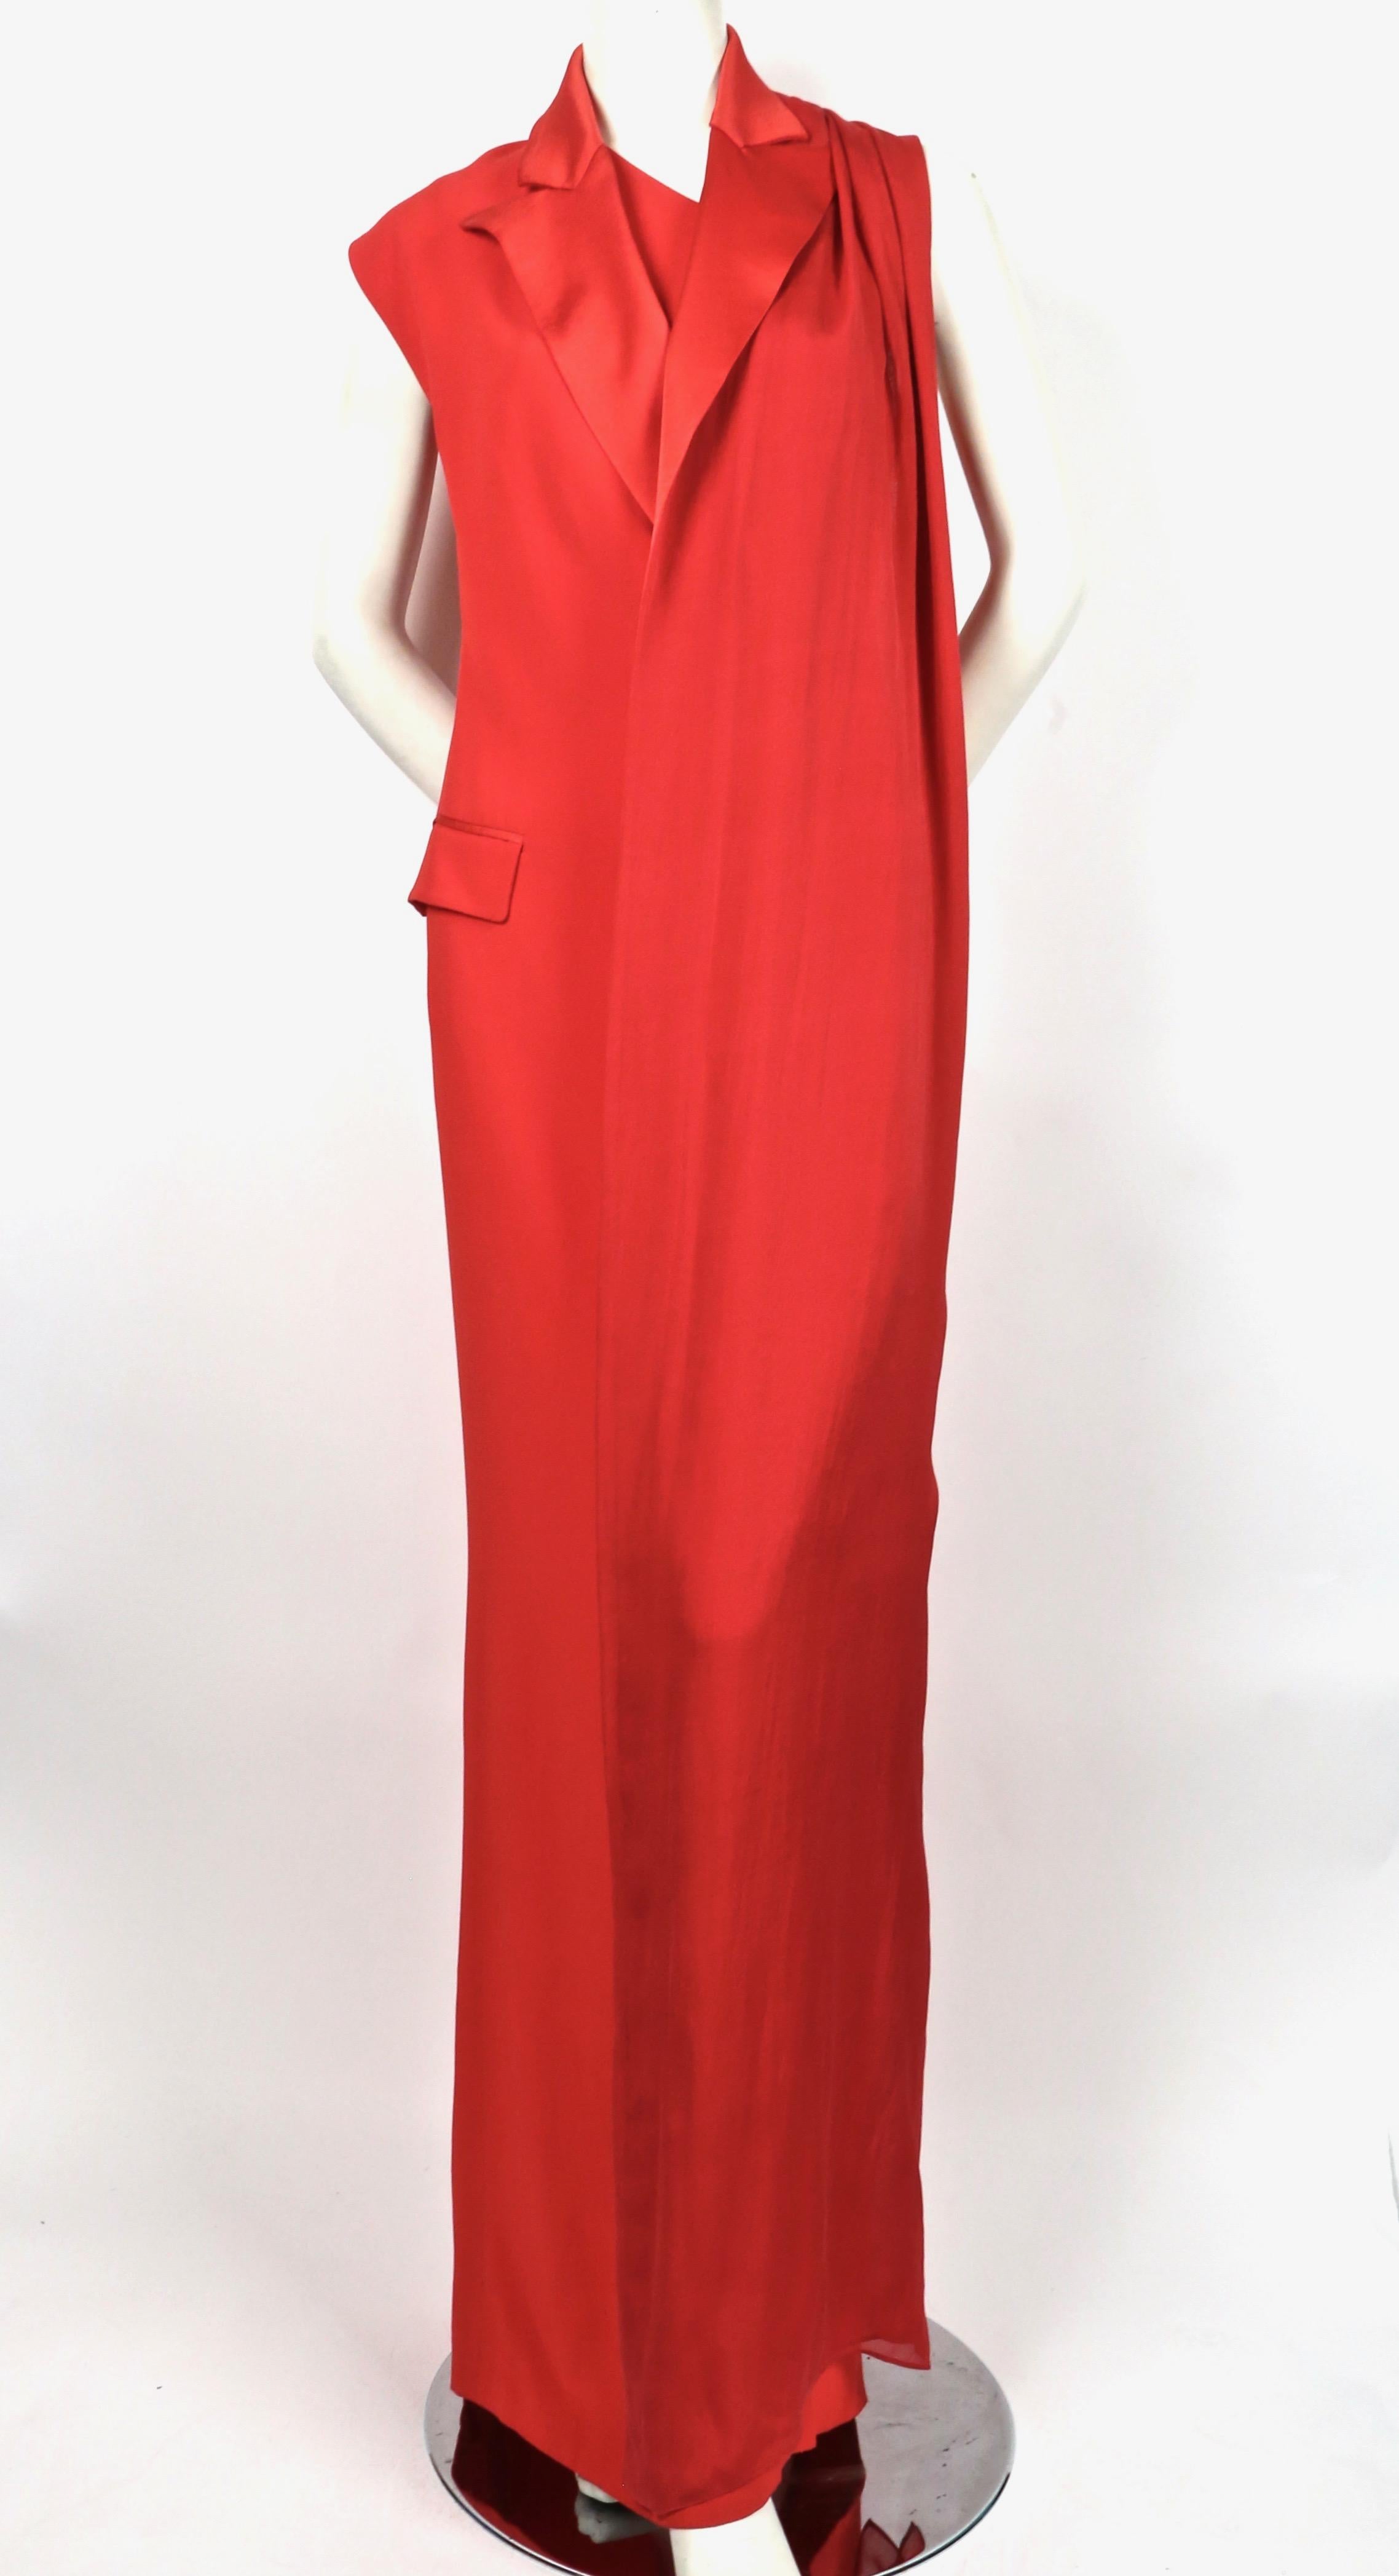 Red tuxedo gown with satin trim and draped silk scarf designed by Jean Paul Gaultier. Labeled a French size 34. Approximate measurements: 32